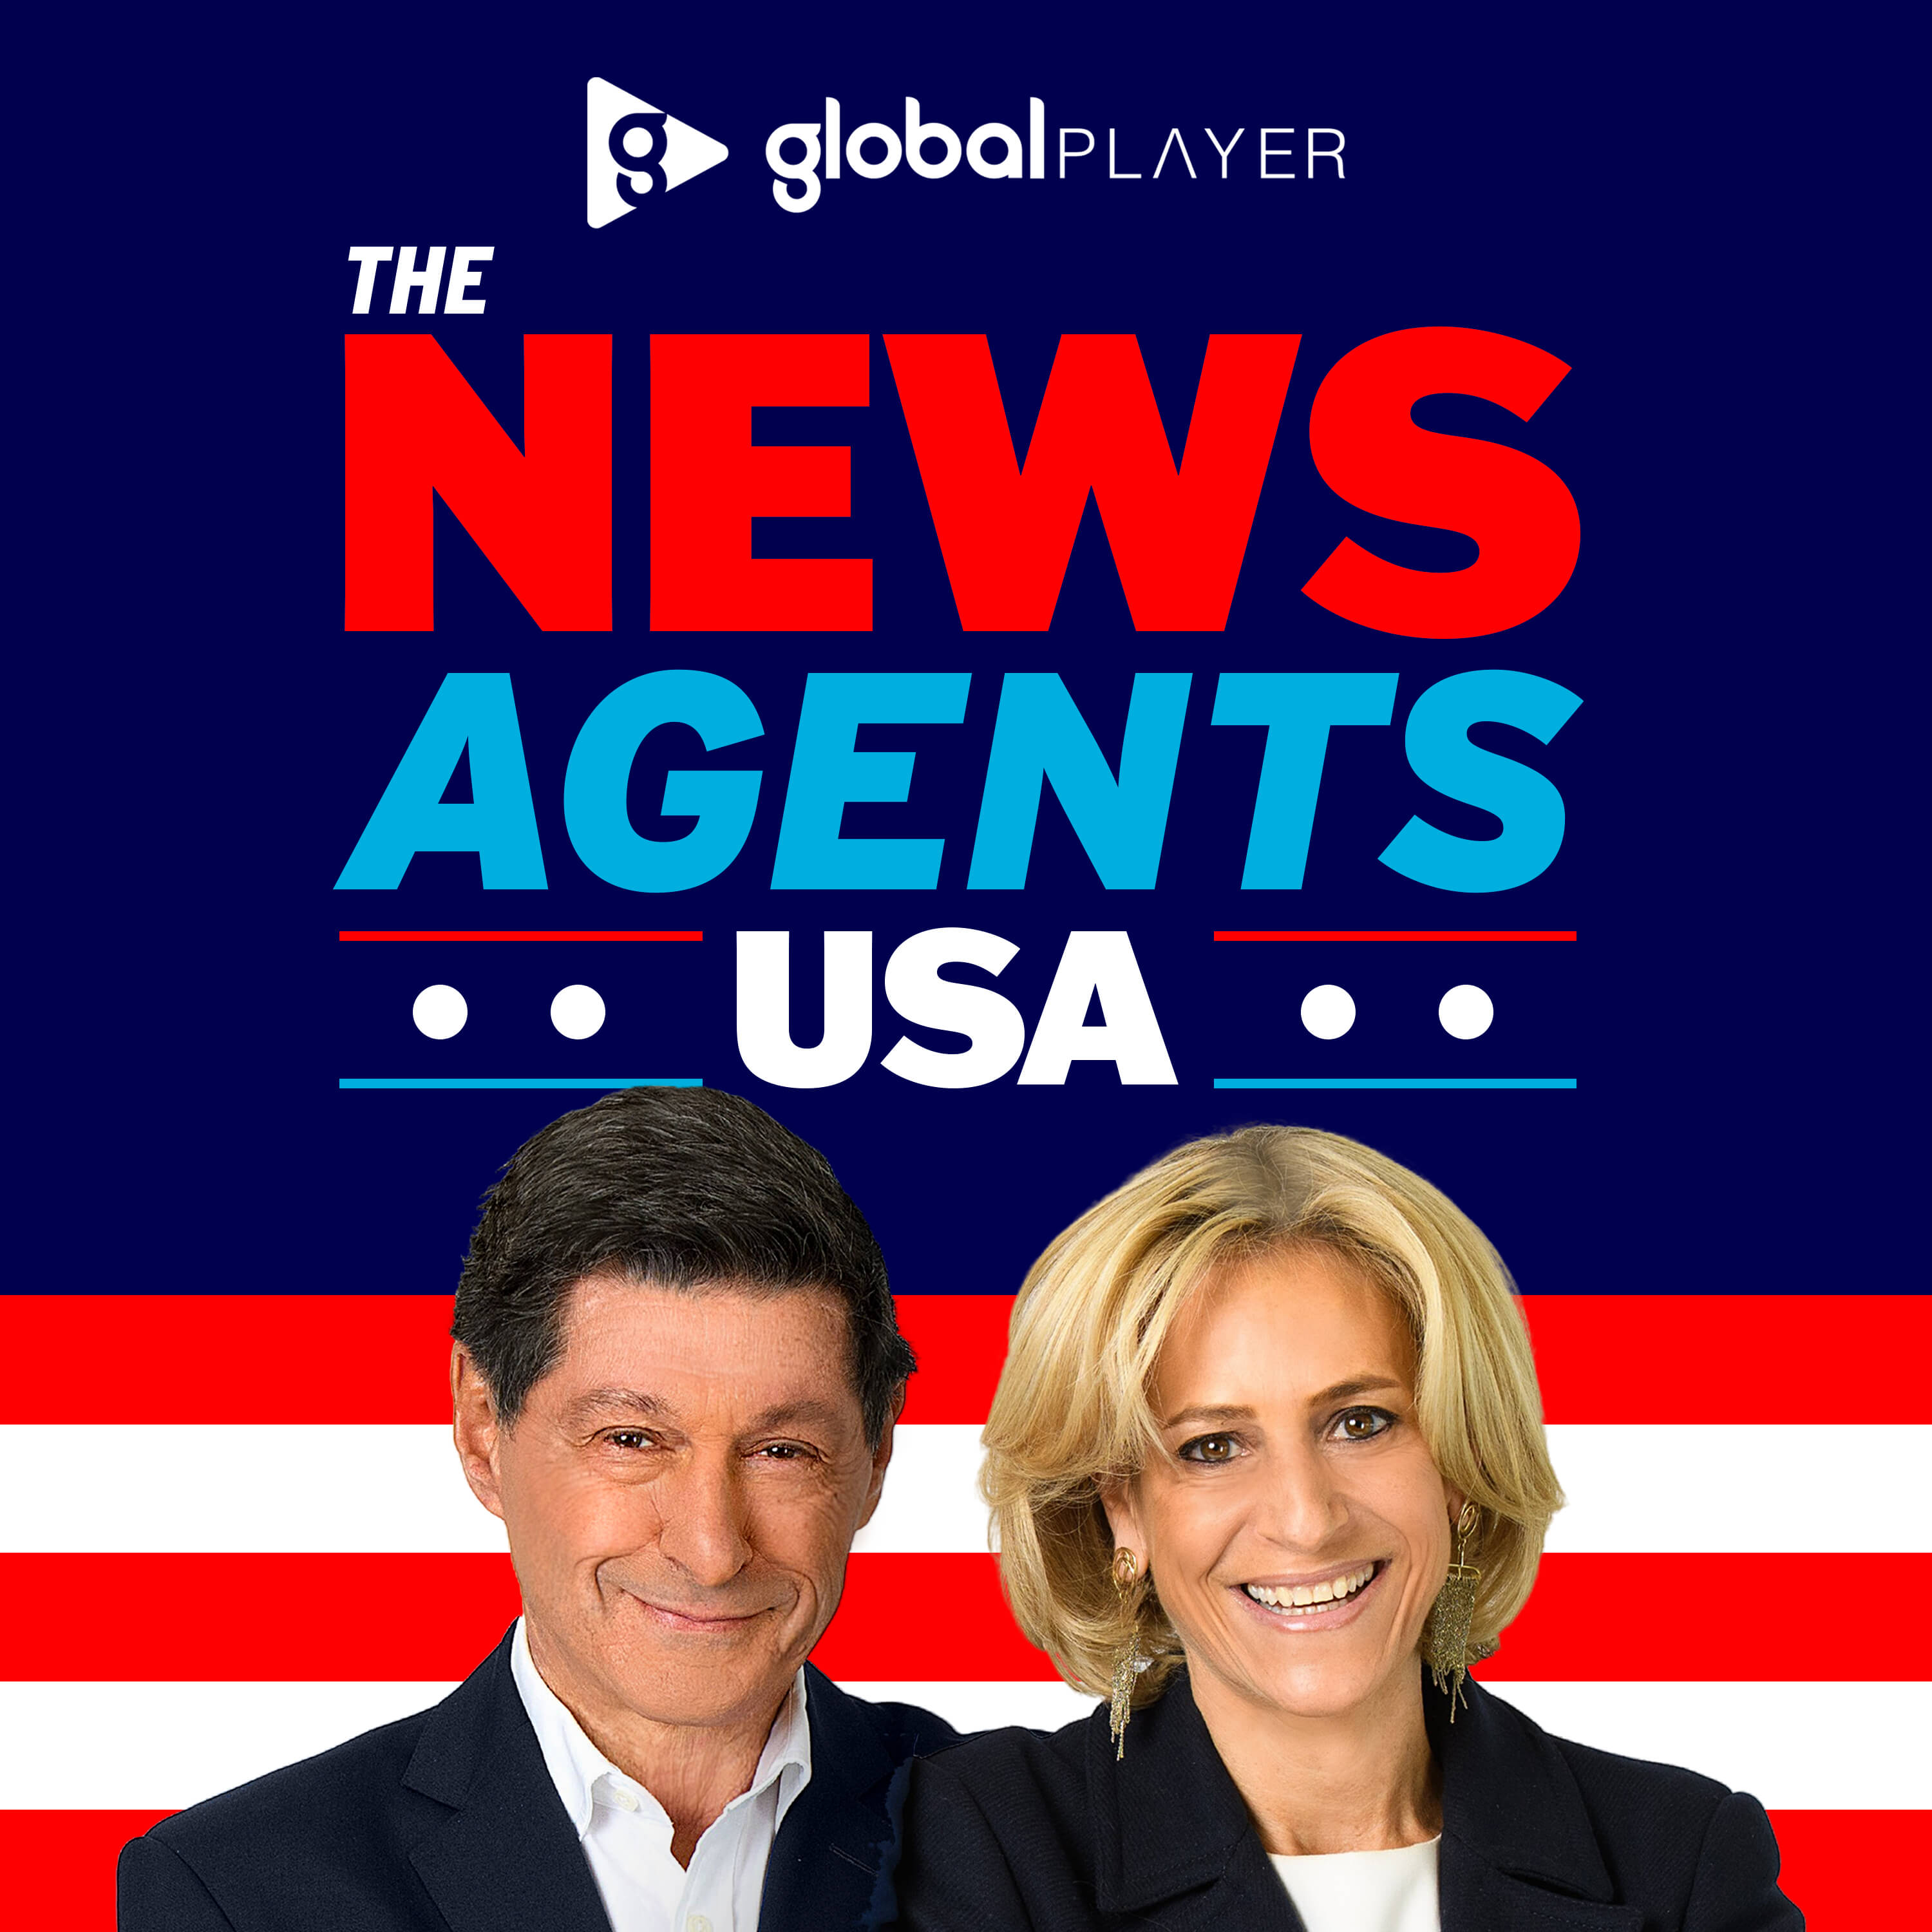 This week on The News Agents USA: The 2024 US election: the starting gun is fired